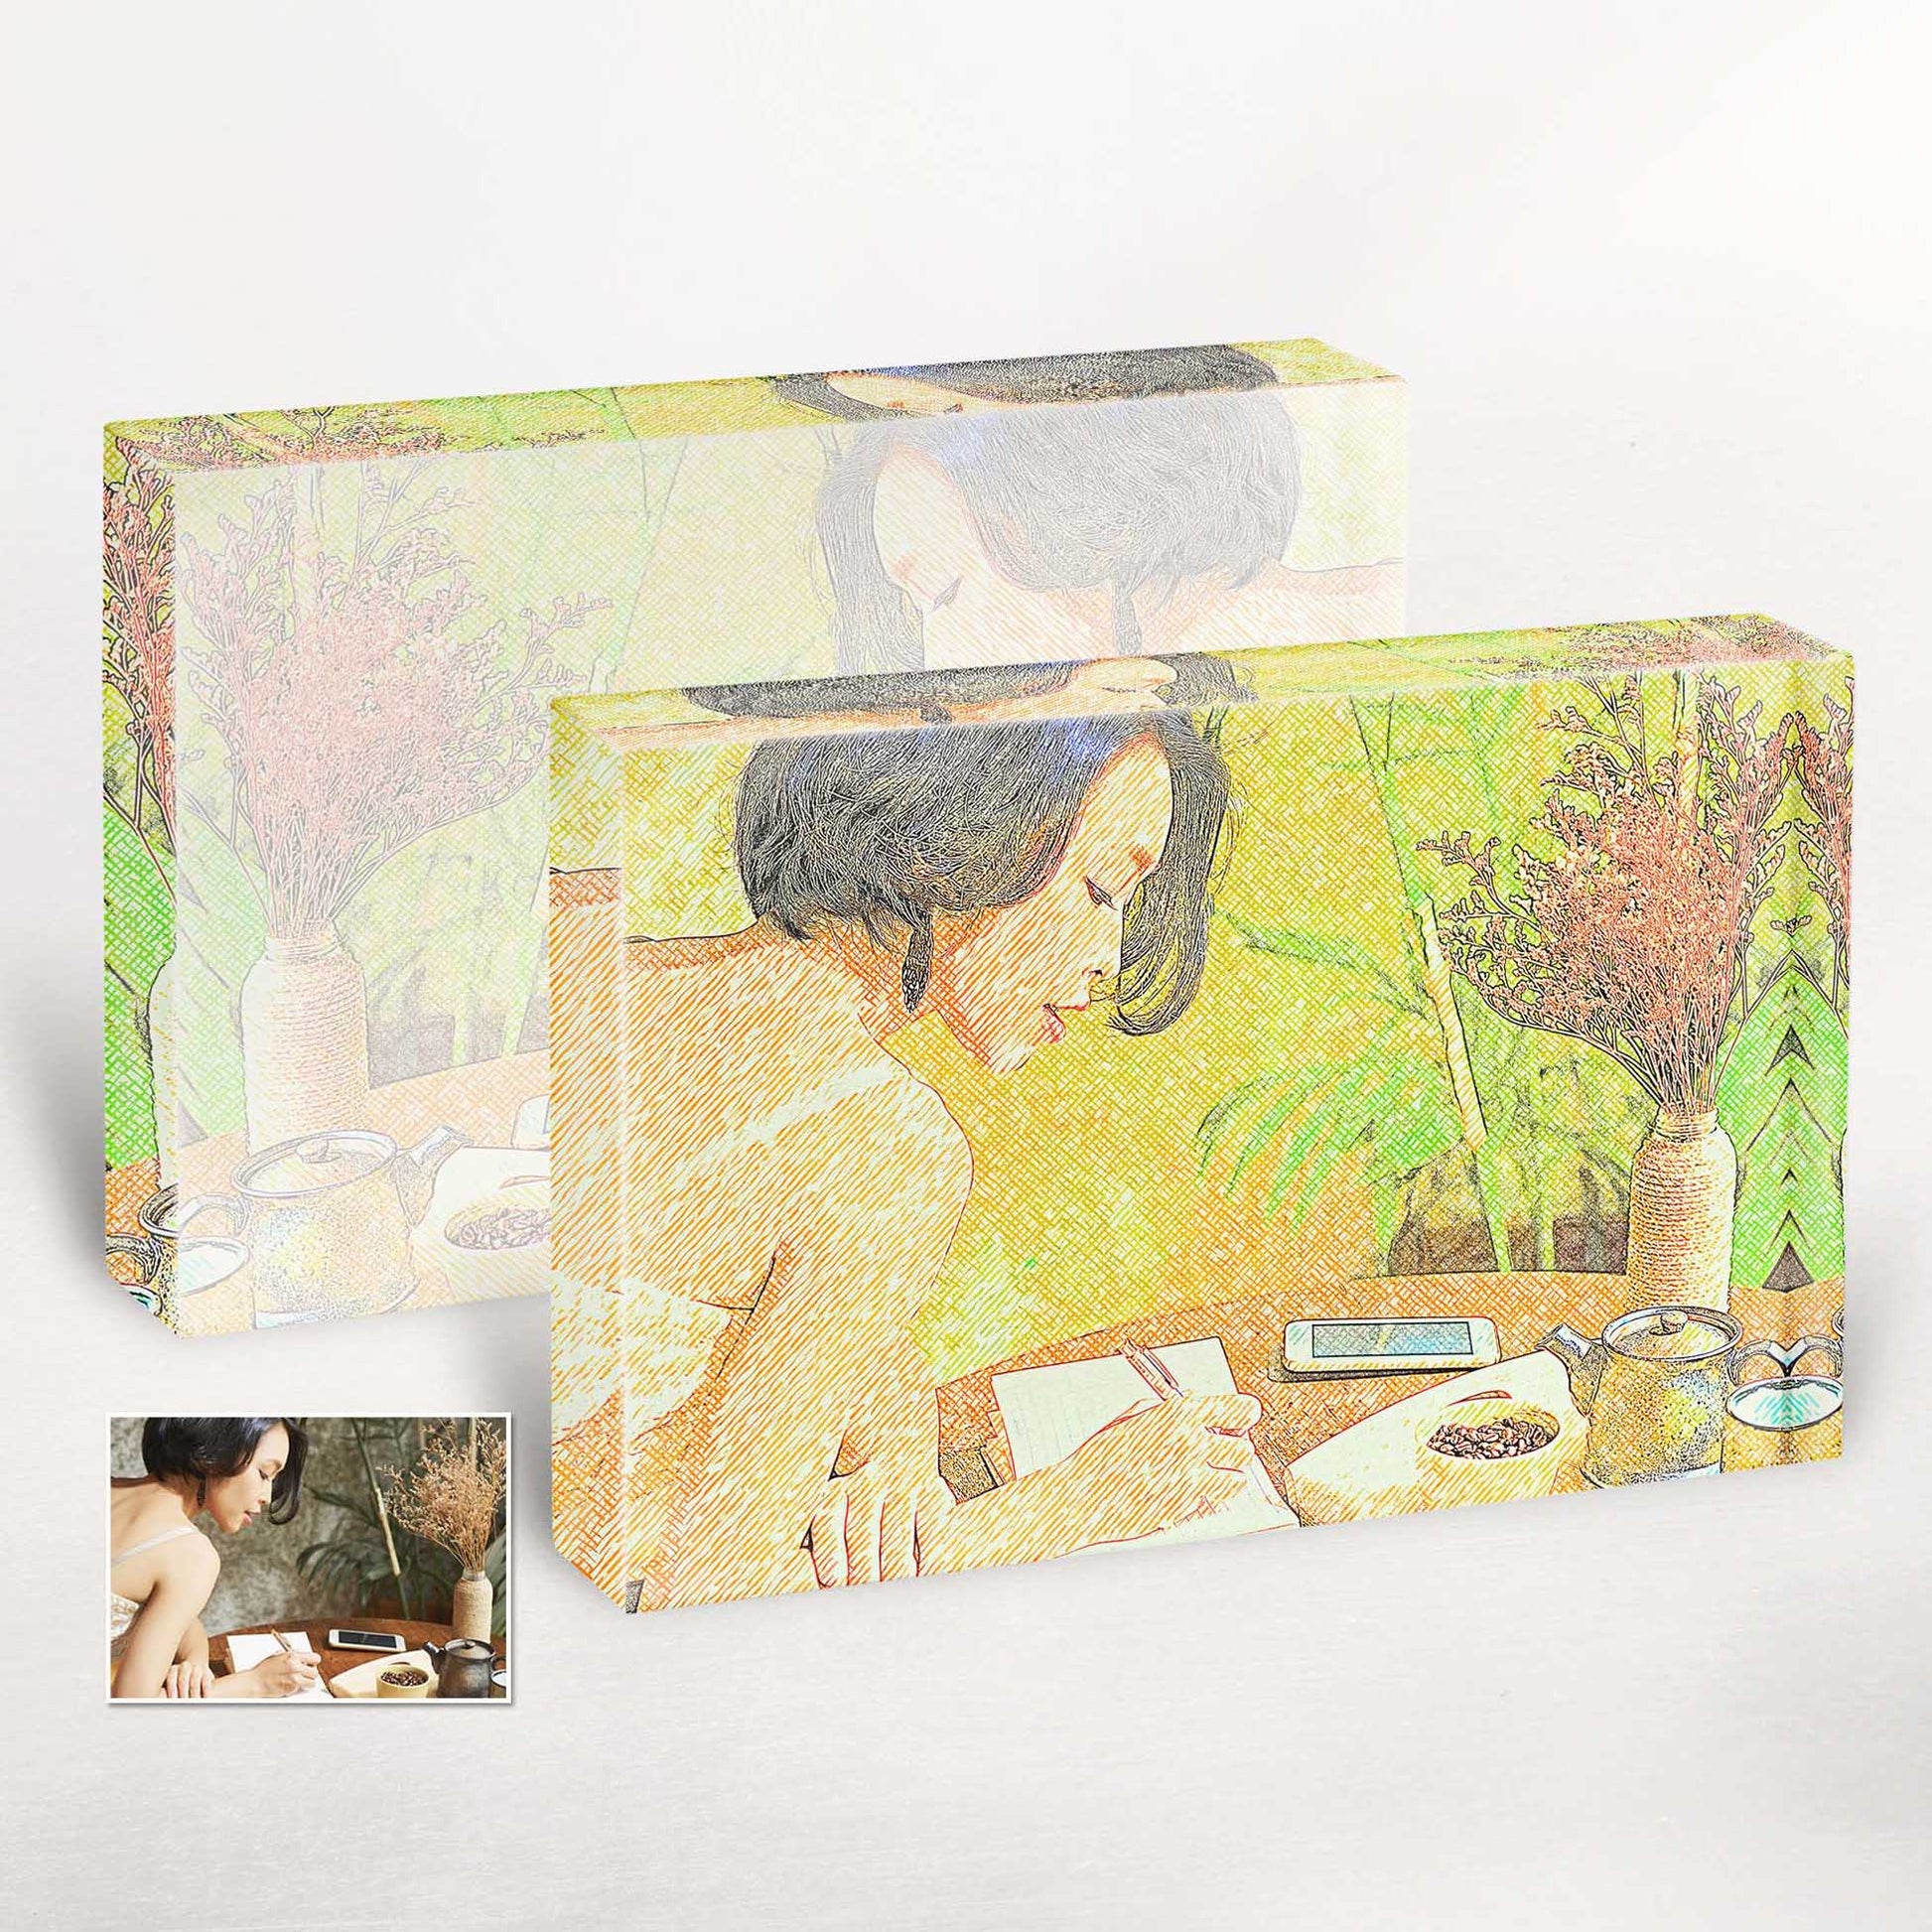 Add a touch of artistic charm to your home decor with our Personalised Drawing Crosshatch Acrylic Block Photo. Its unique crosshatch drawing style brings a natural and boho aesthetic, creating a hip 